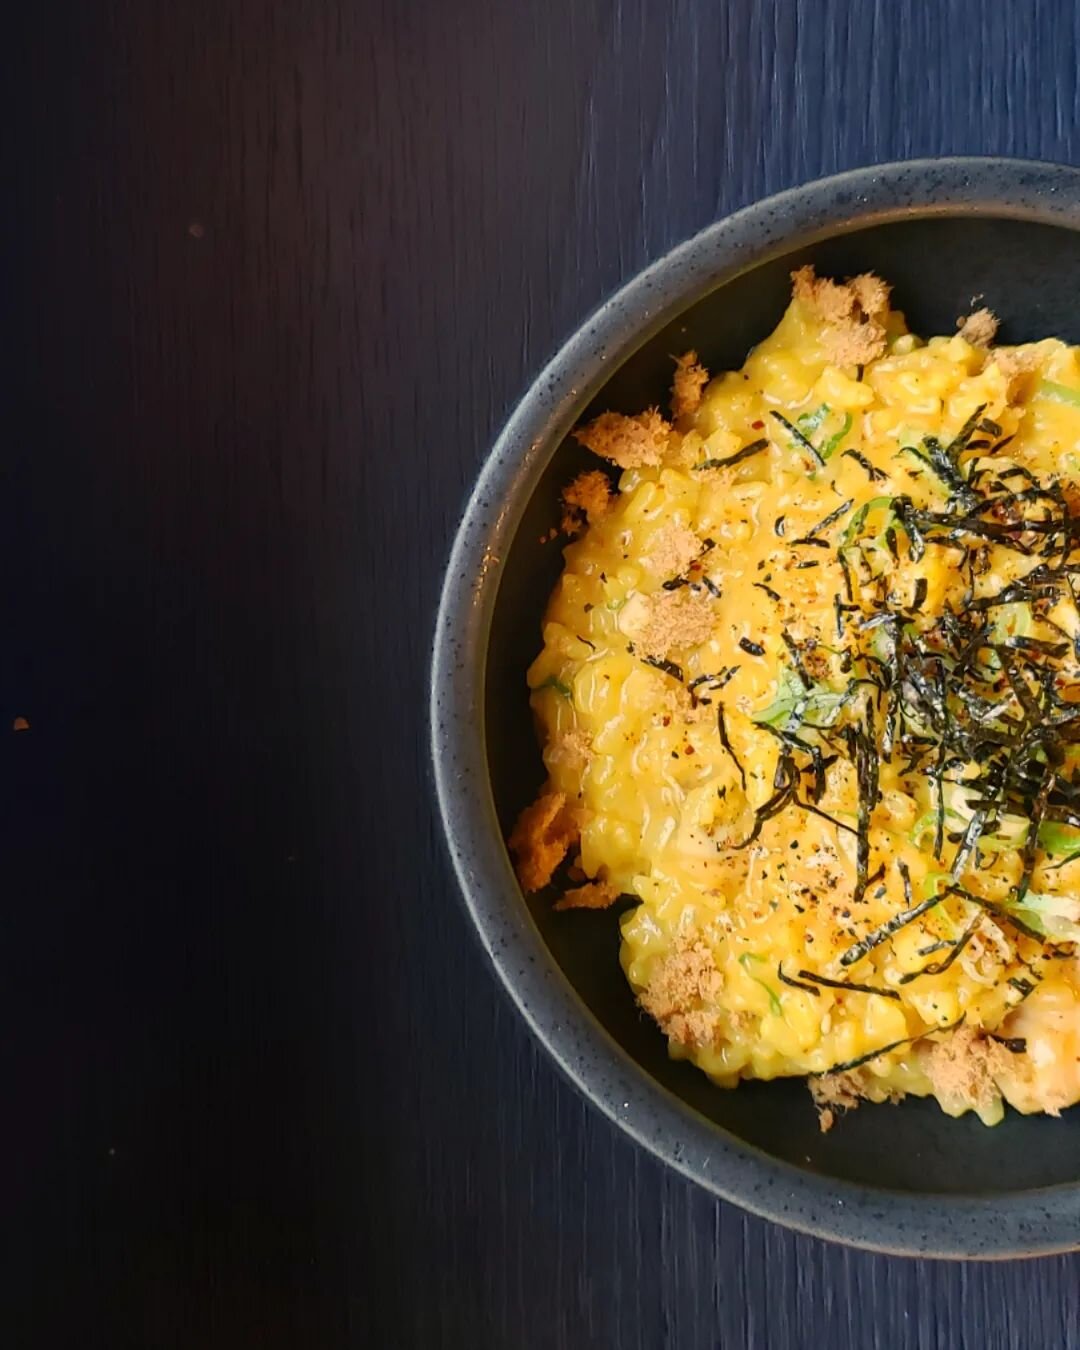 Uni risotto.
This beautiful dish was originally part of our Iron Chef Experience where the customer had chosen uni as their choice of ingredient. What was born then is now a staple to our repertoire - fragrant saffron and sushi rice bathed in uni but